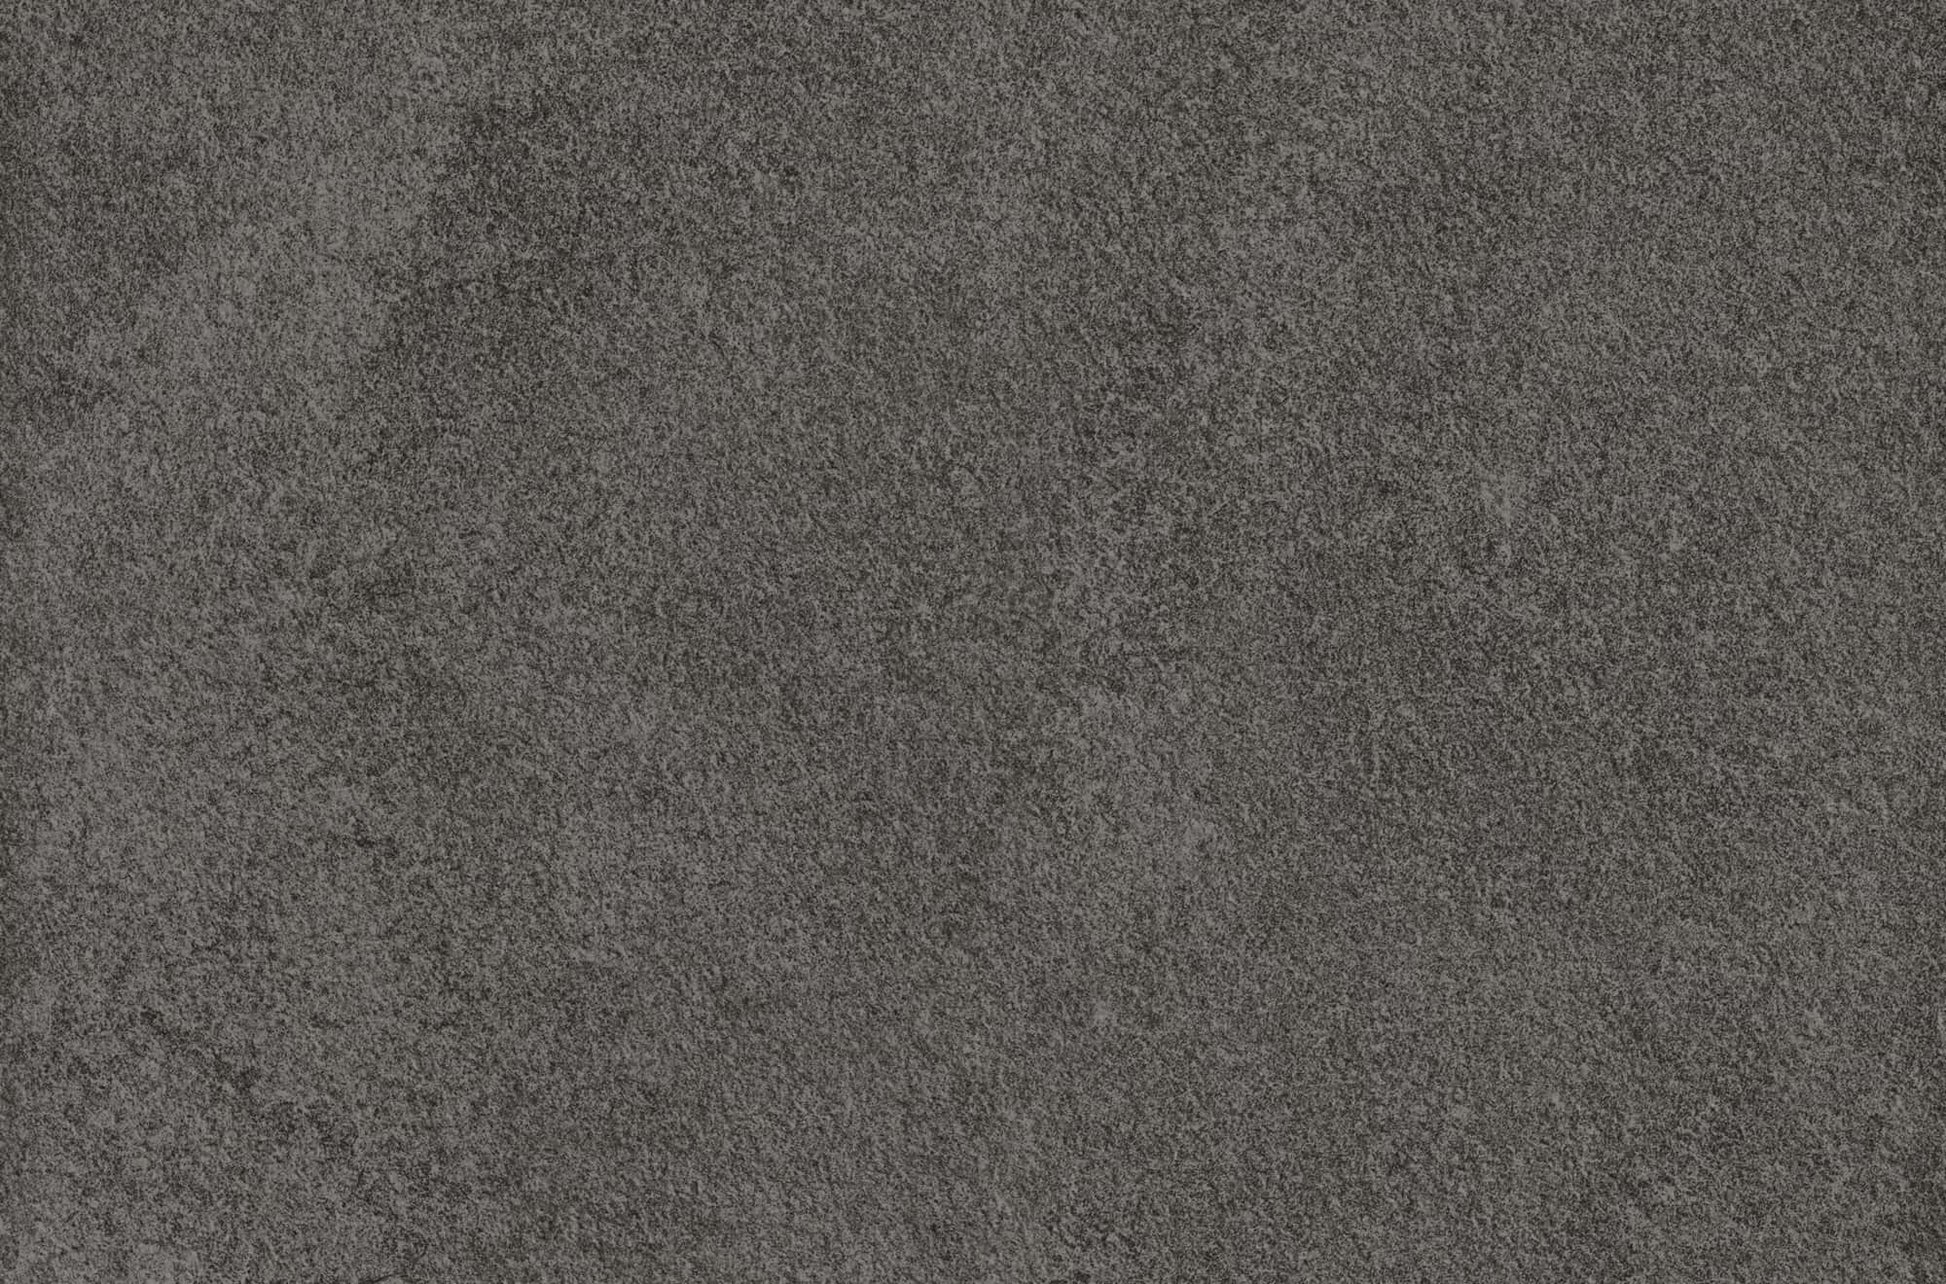 Avenue Dark Grey 20mm Extra Thick Outdoor Porcelain Tile